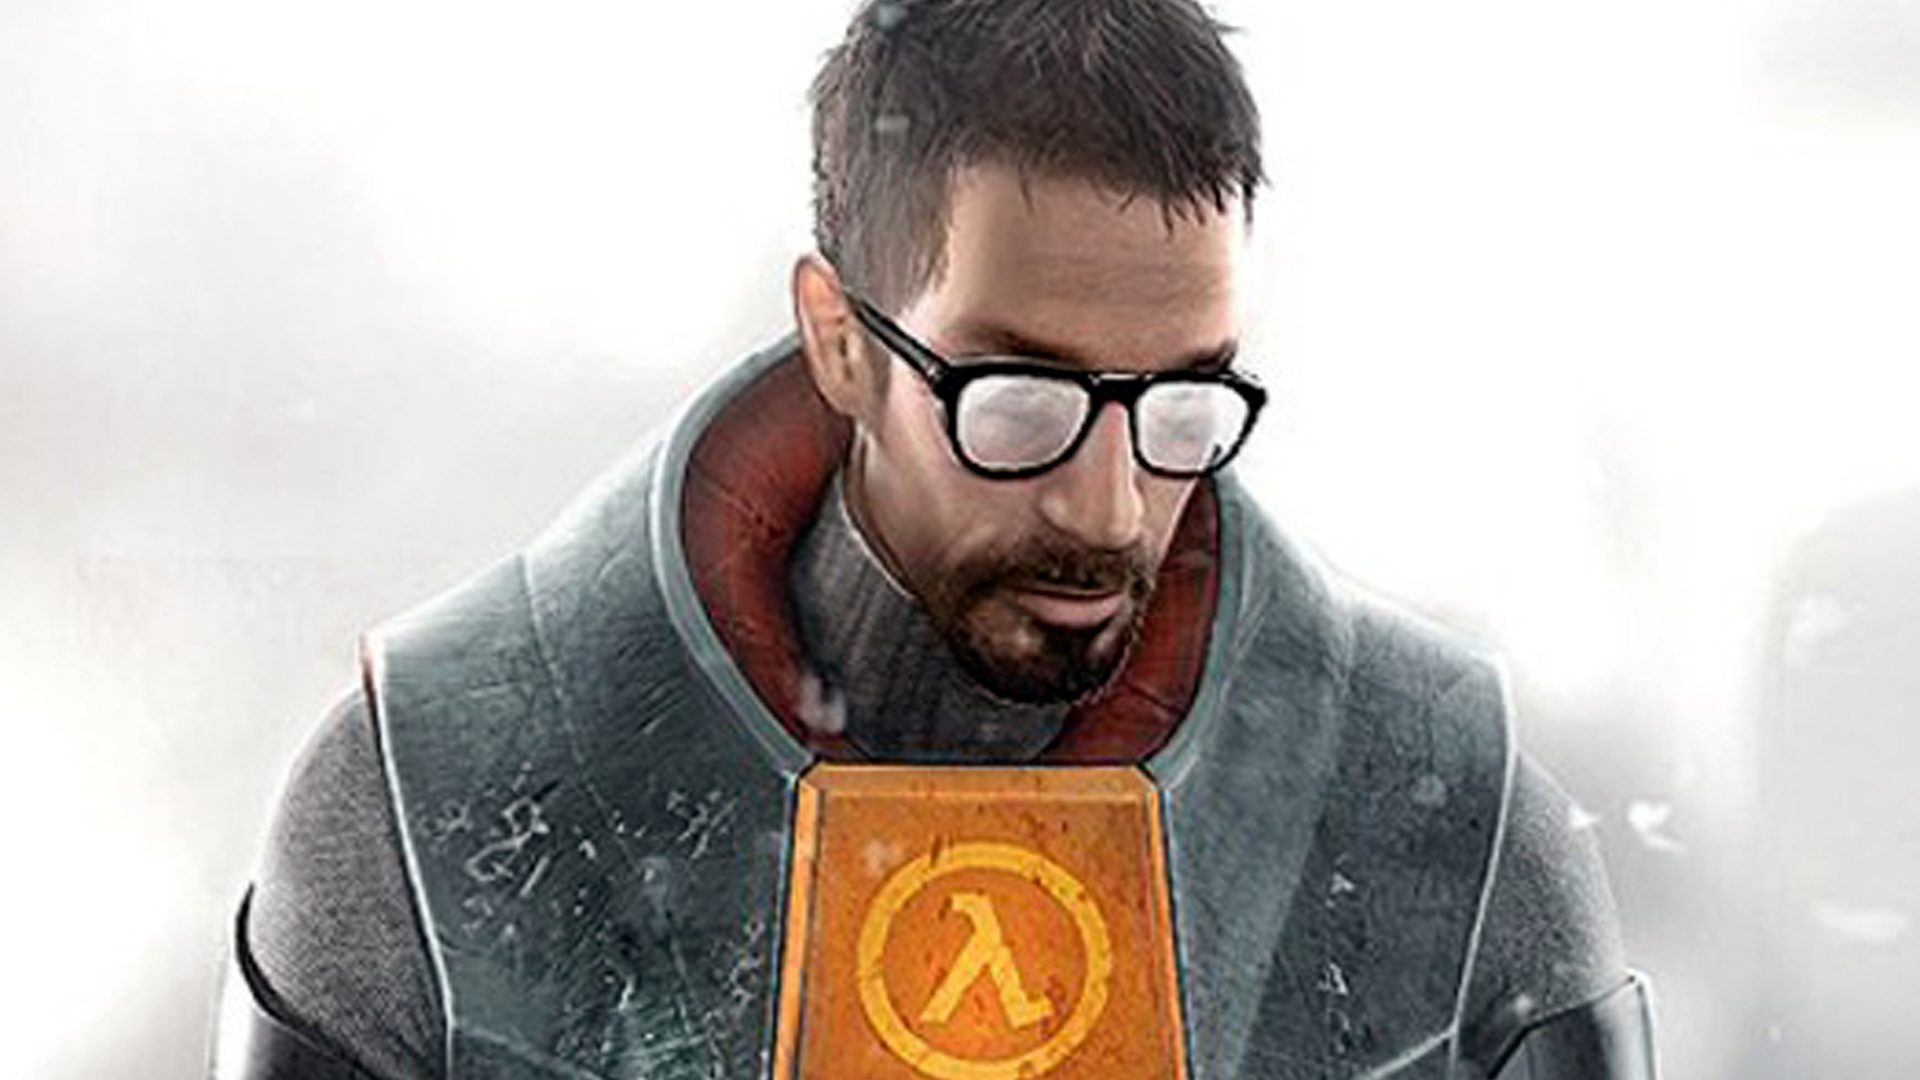 Half-Life 3 reportedly “not taking place” but a Steam Deck FPS/RTS may be coming